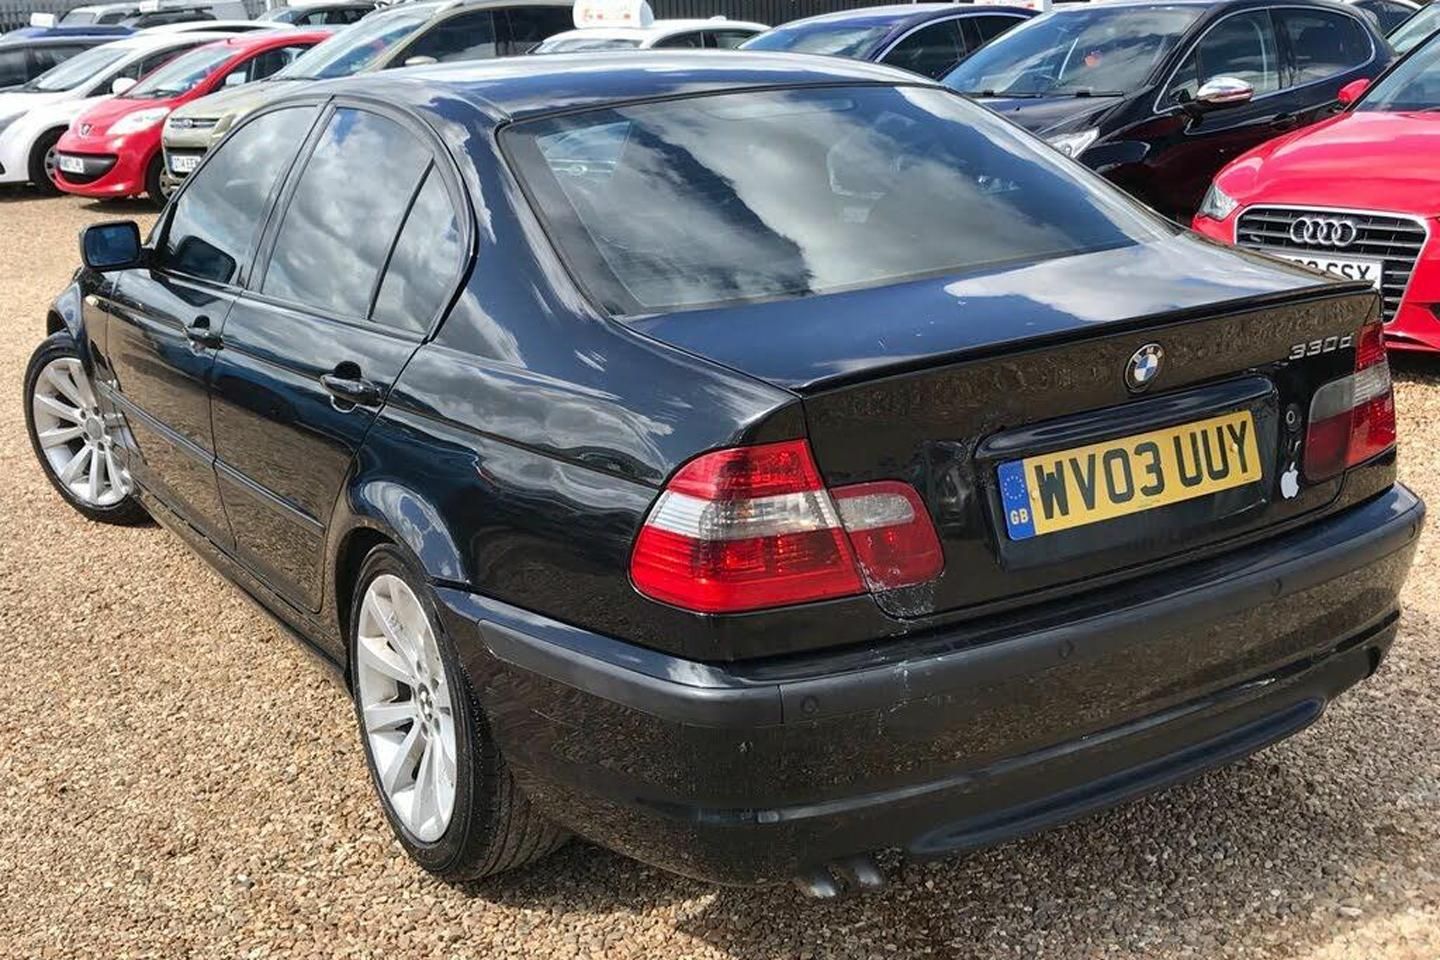 BMW 330d (E46)  Shed of the Week - PistonHeads UK